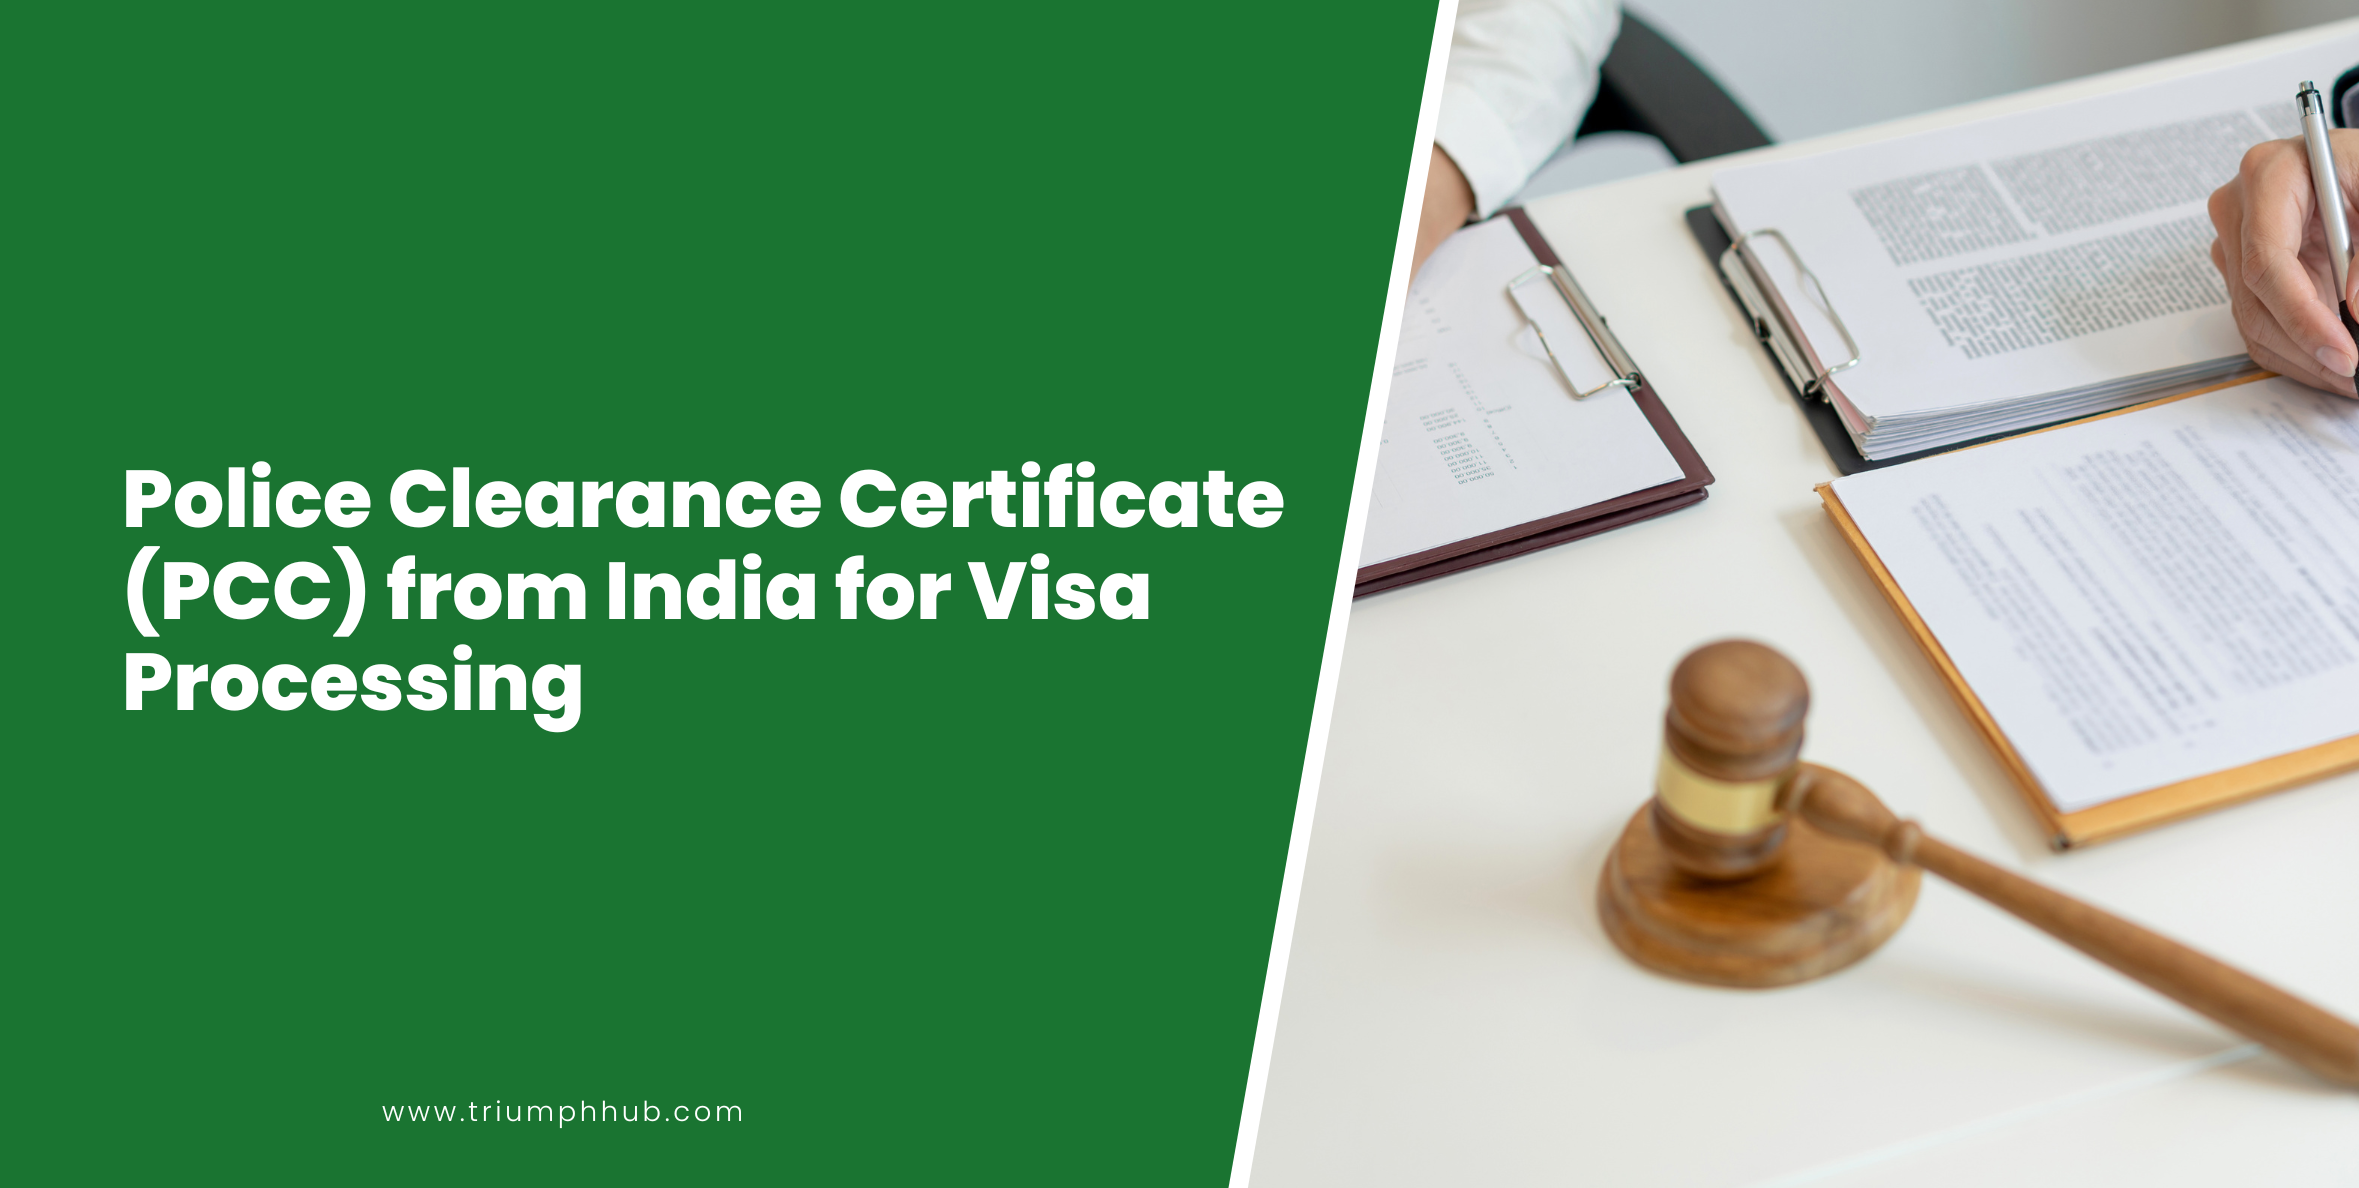 alt="Police Clearance Certificate (PCC) from India for Visa Processing"